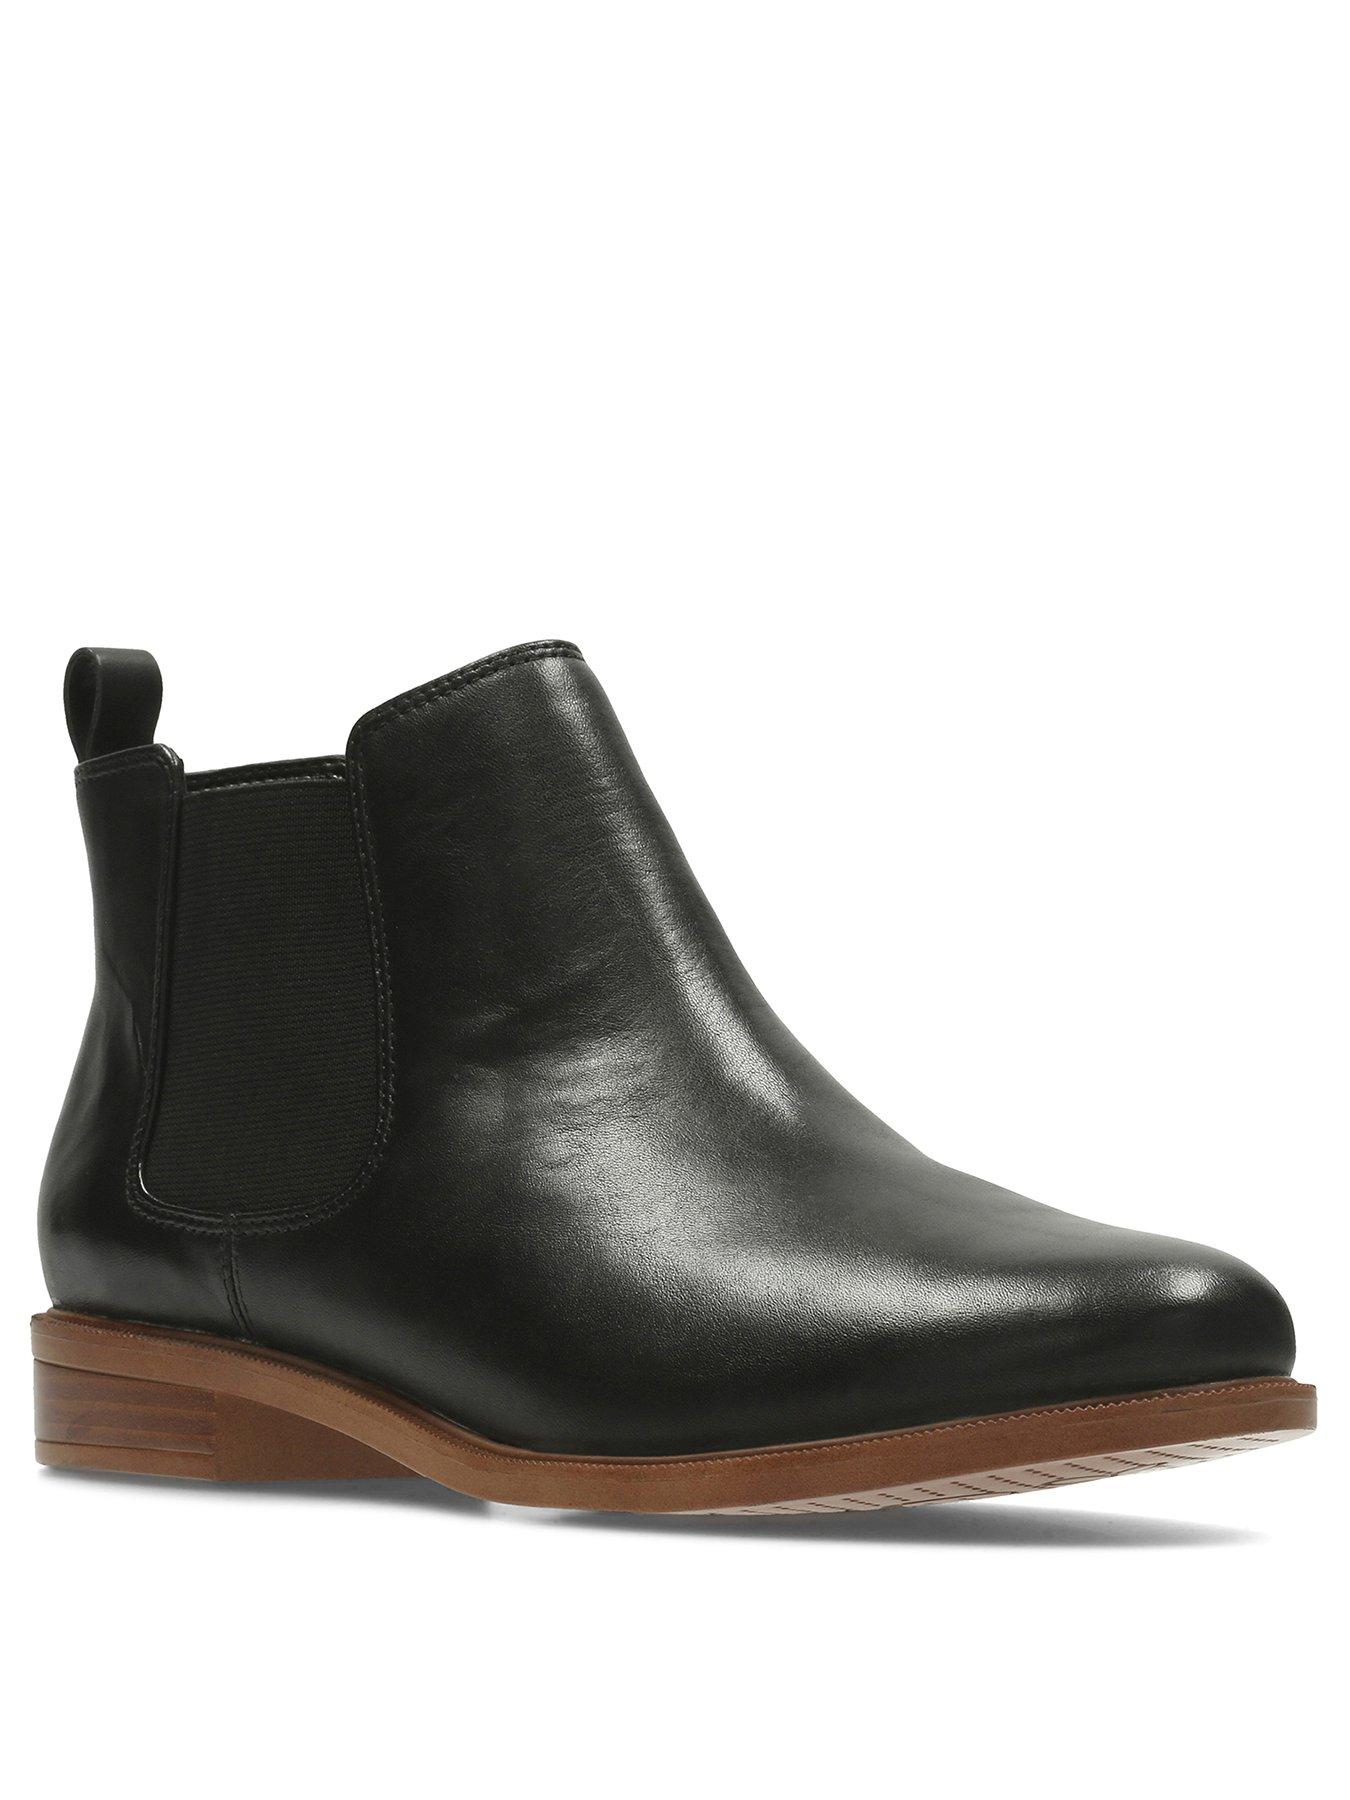 clarks shoes ankle boots